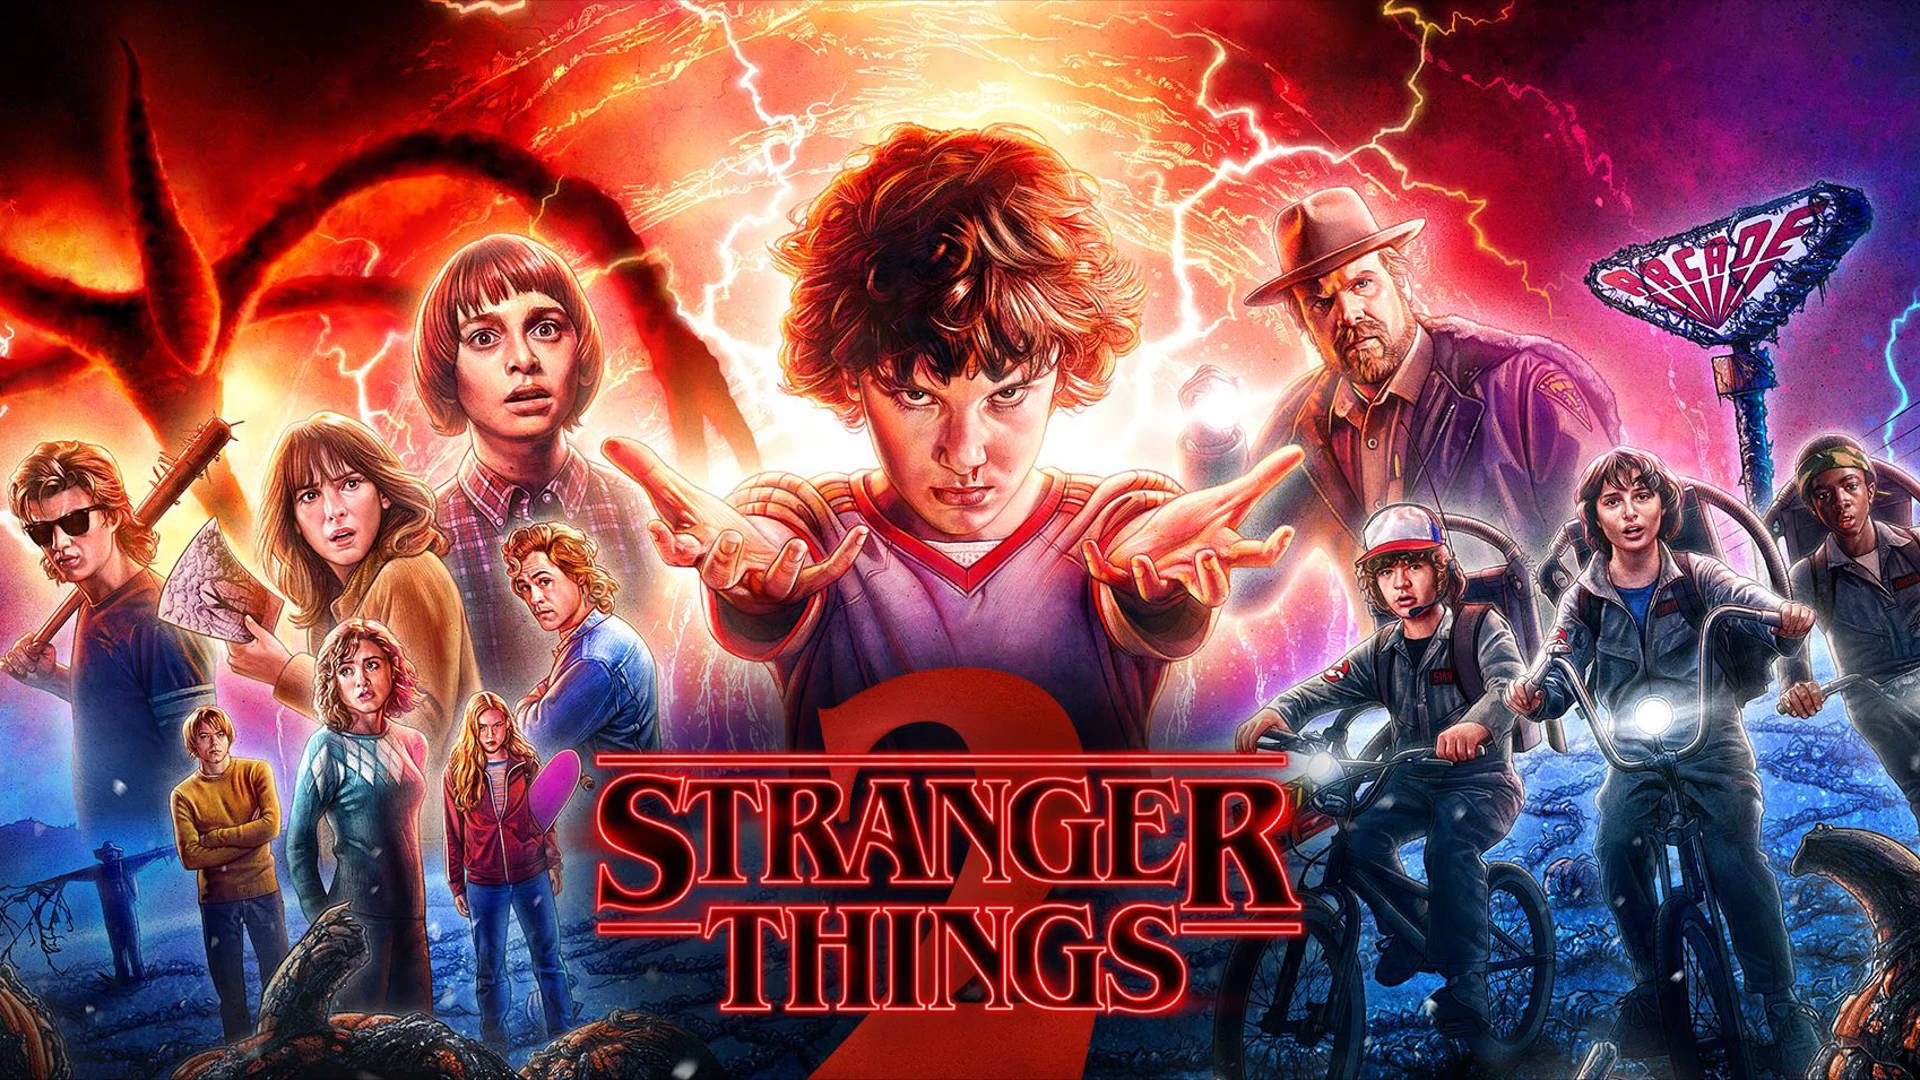 stranger things 2 poster with many characters Wallpaper